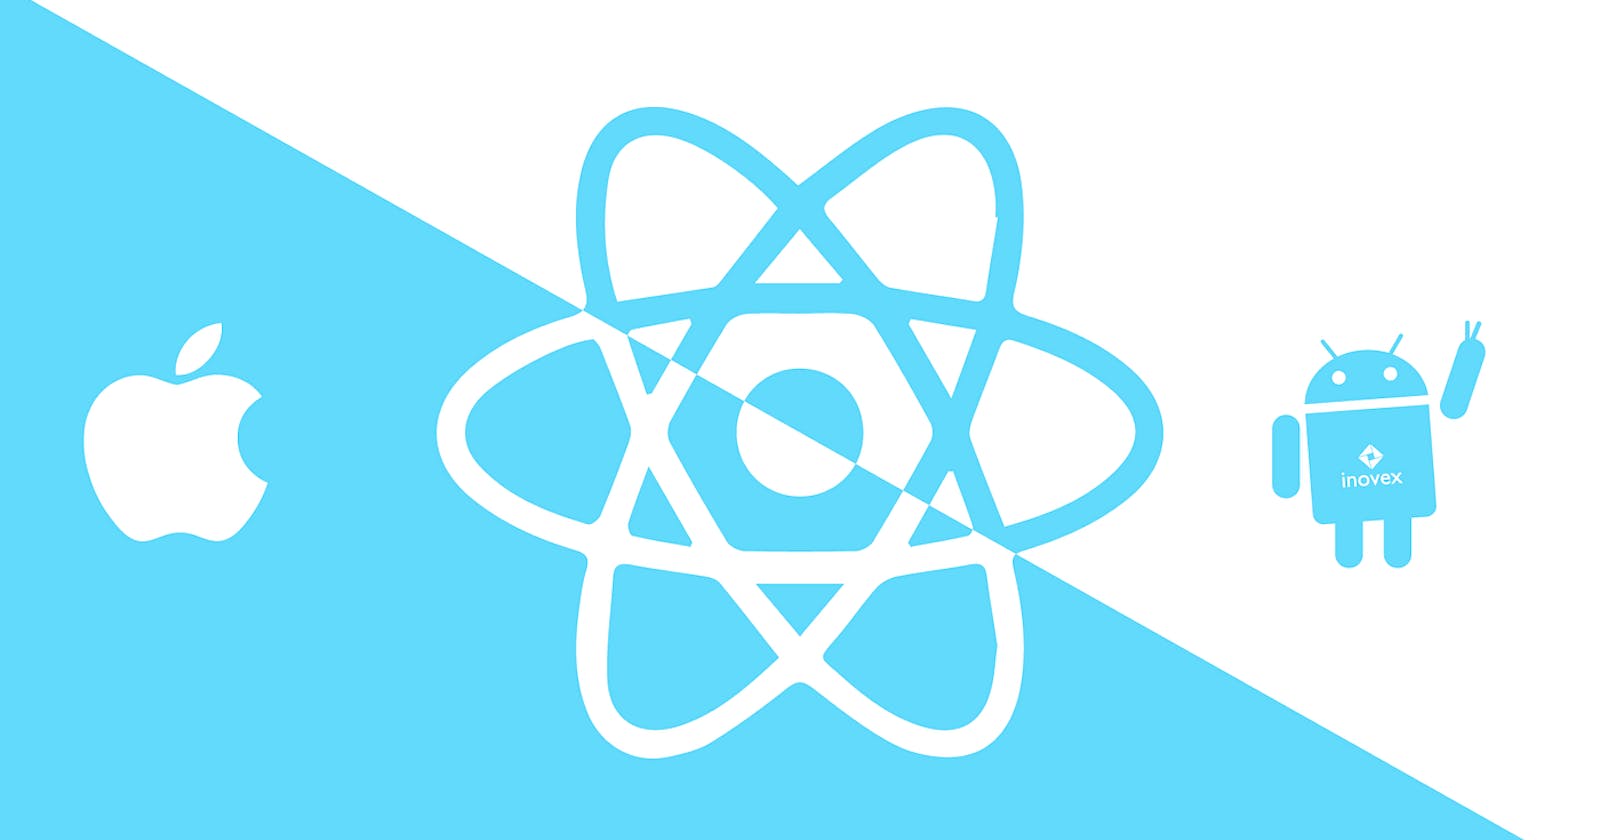 Creating an initial react-native project.